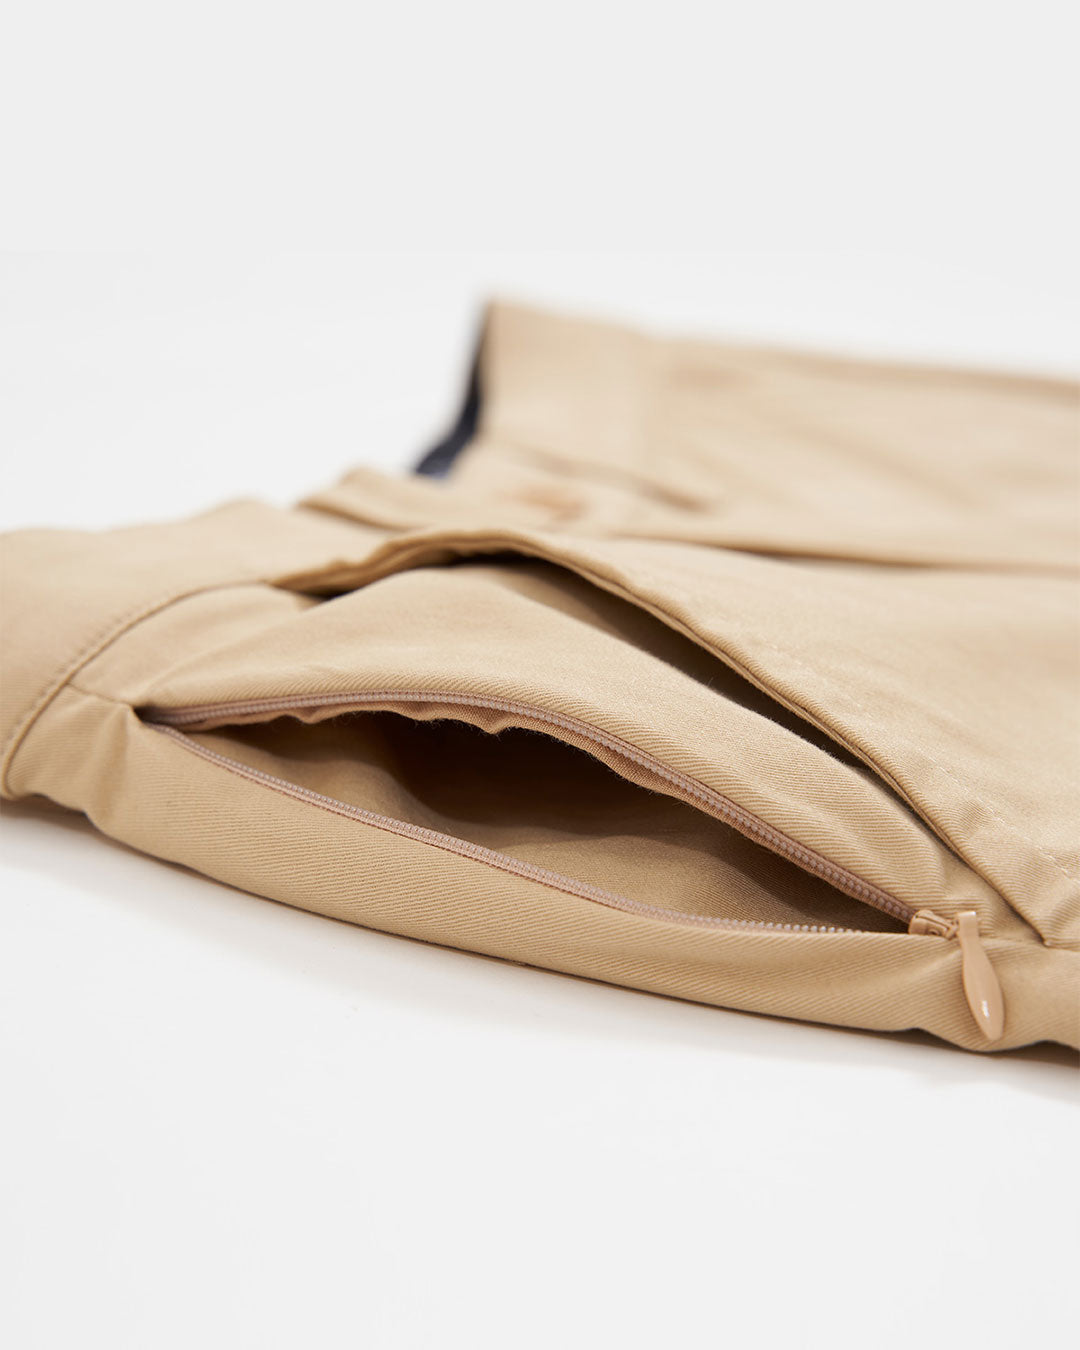 9" All Day Chino Shorts 3.0 (Slim Fit)